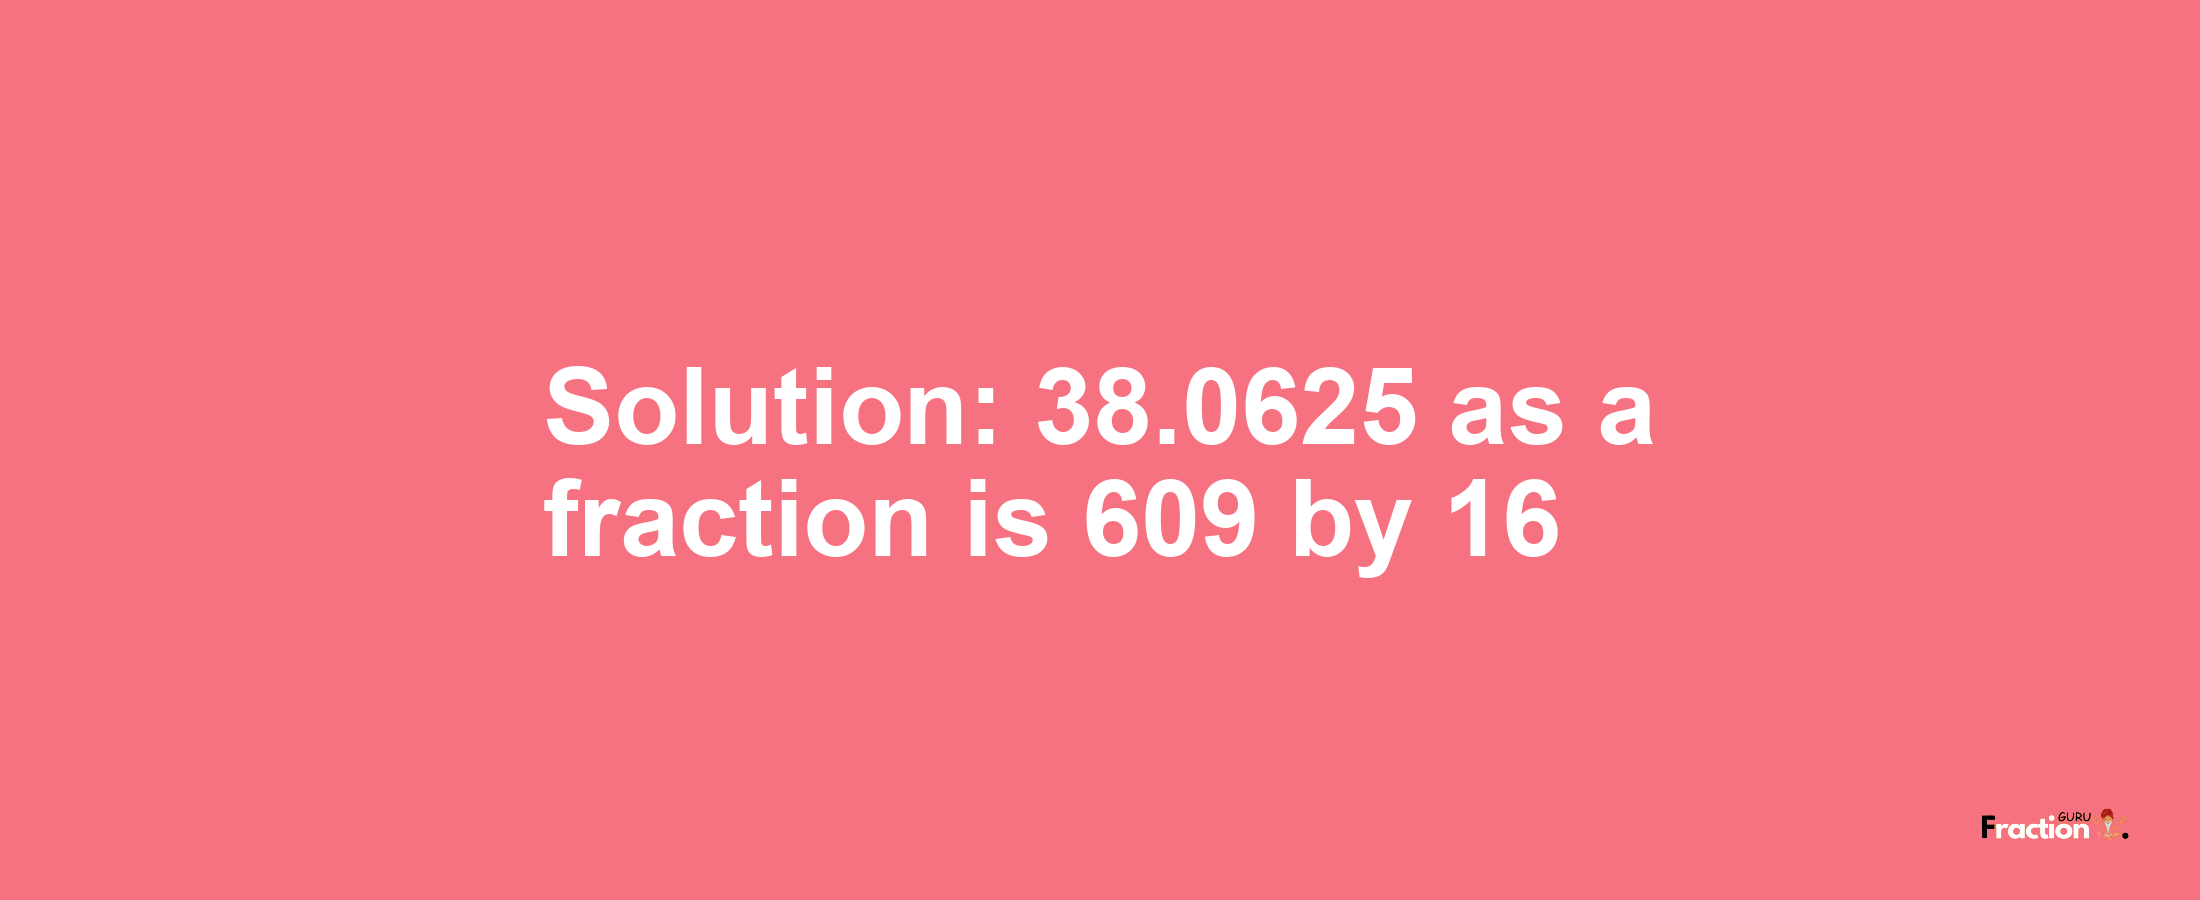 Solution:38.0625 as a fraction is 609/16